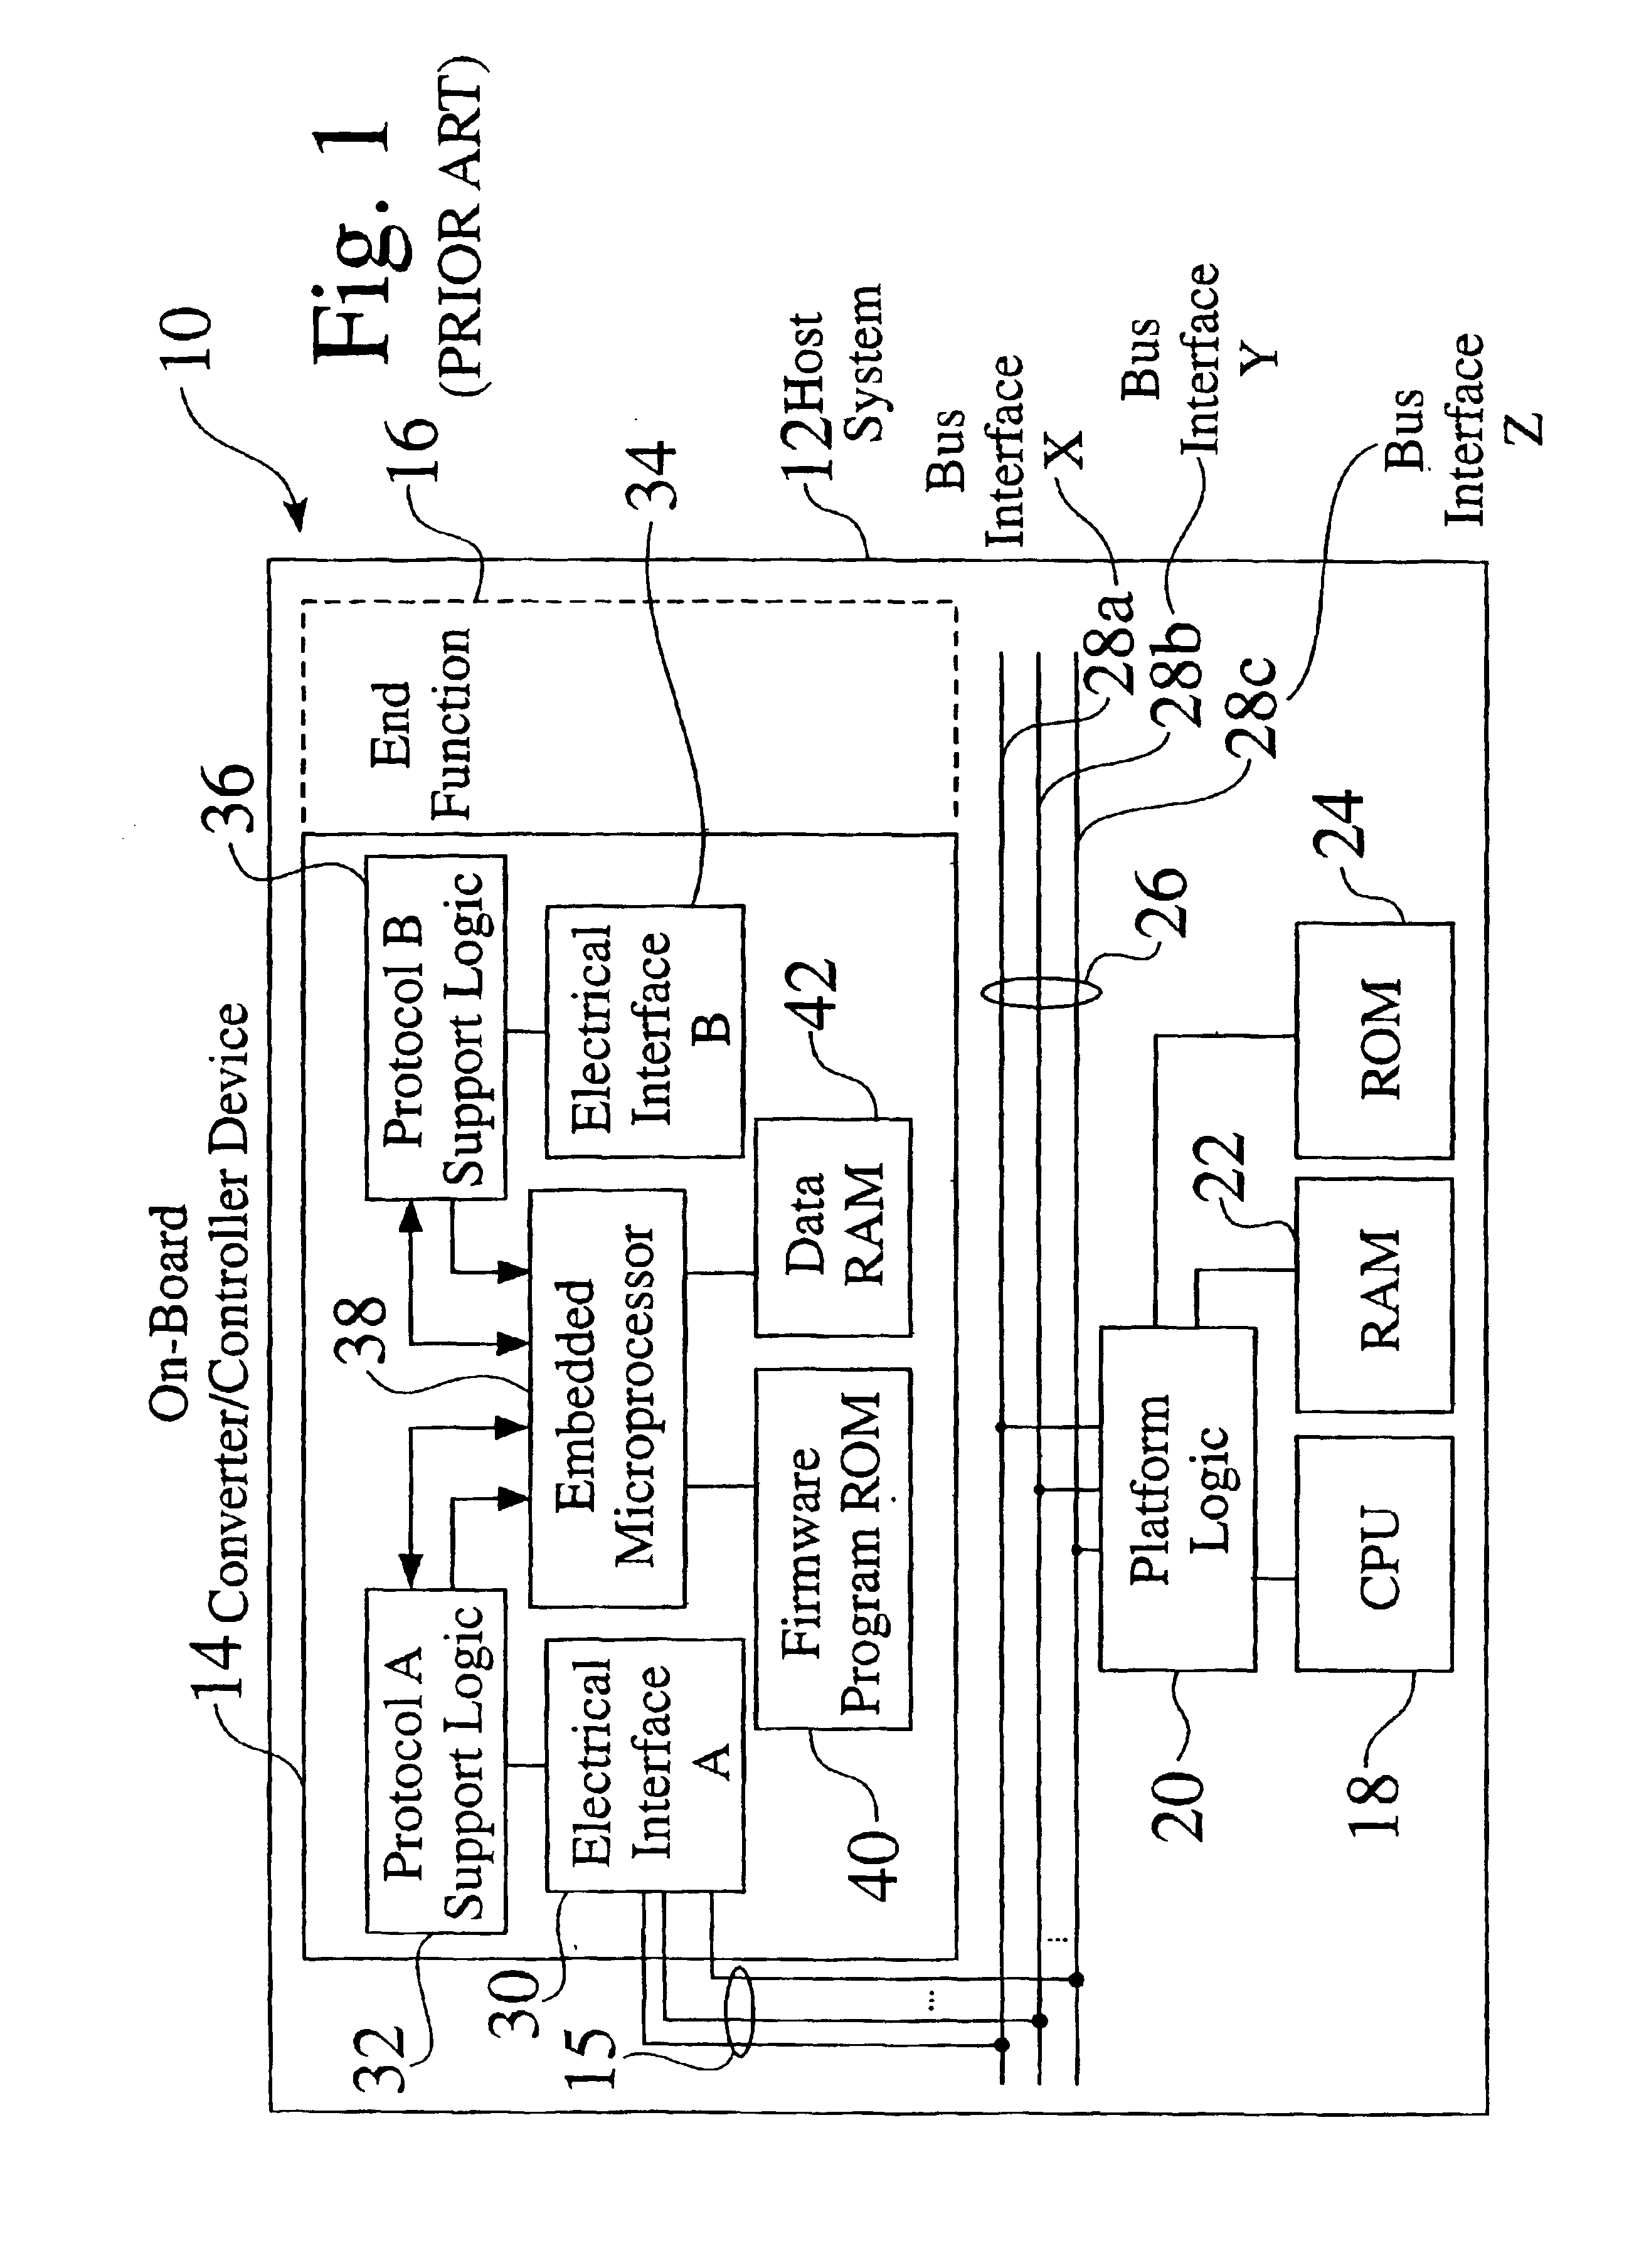 System and method capable of offloading converter/controller-specific tasks to a system microprocessor